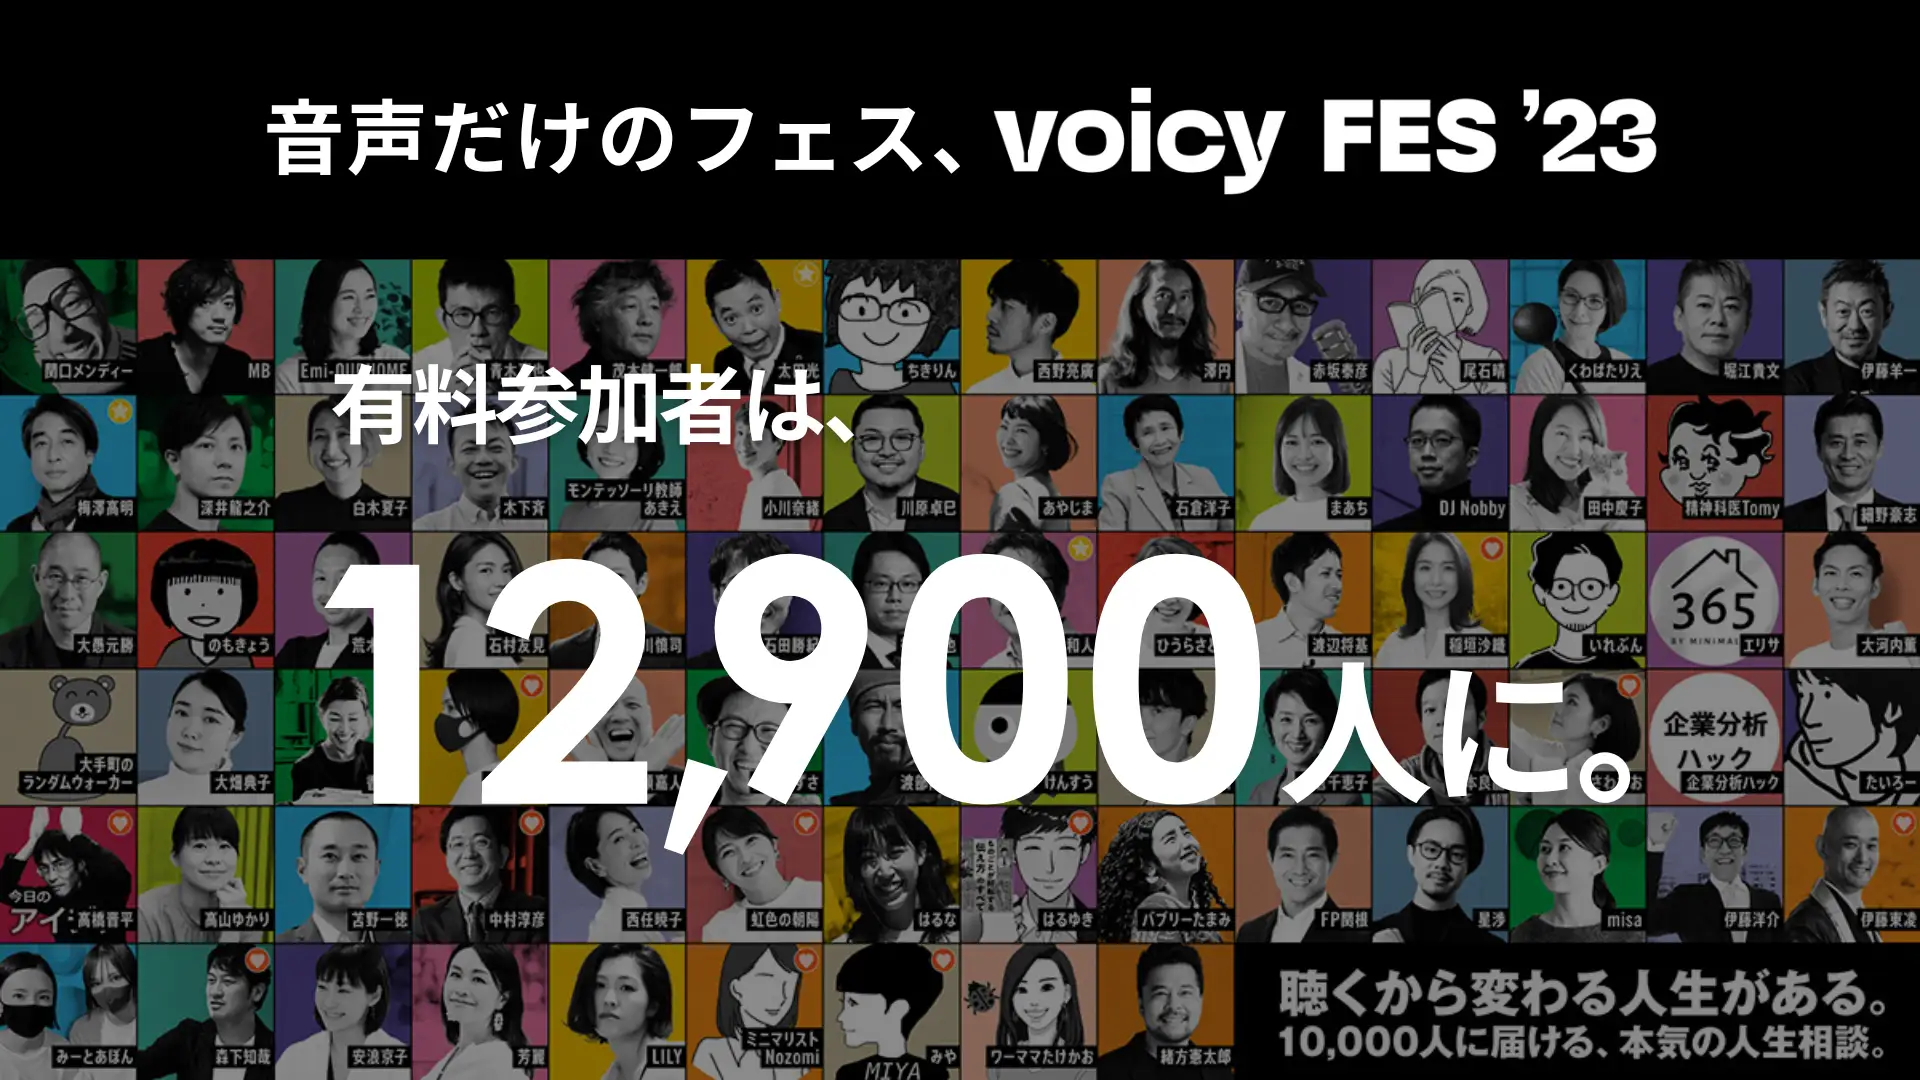 Voicyが音声だけのフェス「Voicy FES'23」を開催。有料参加者は12000人越えに